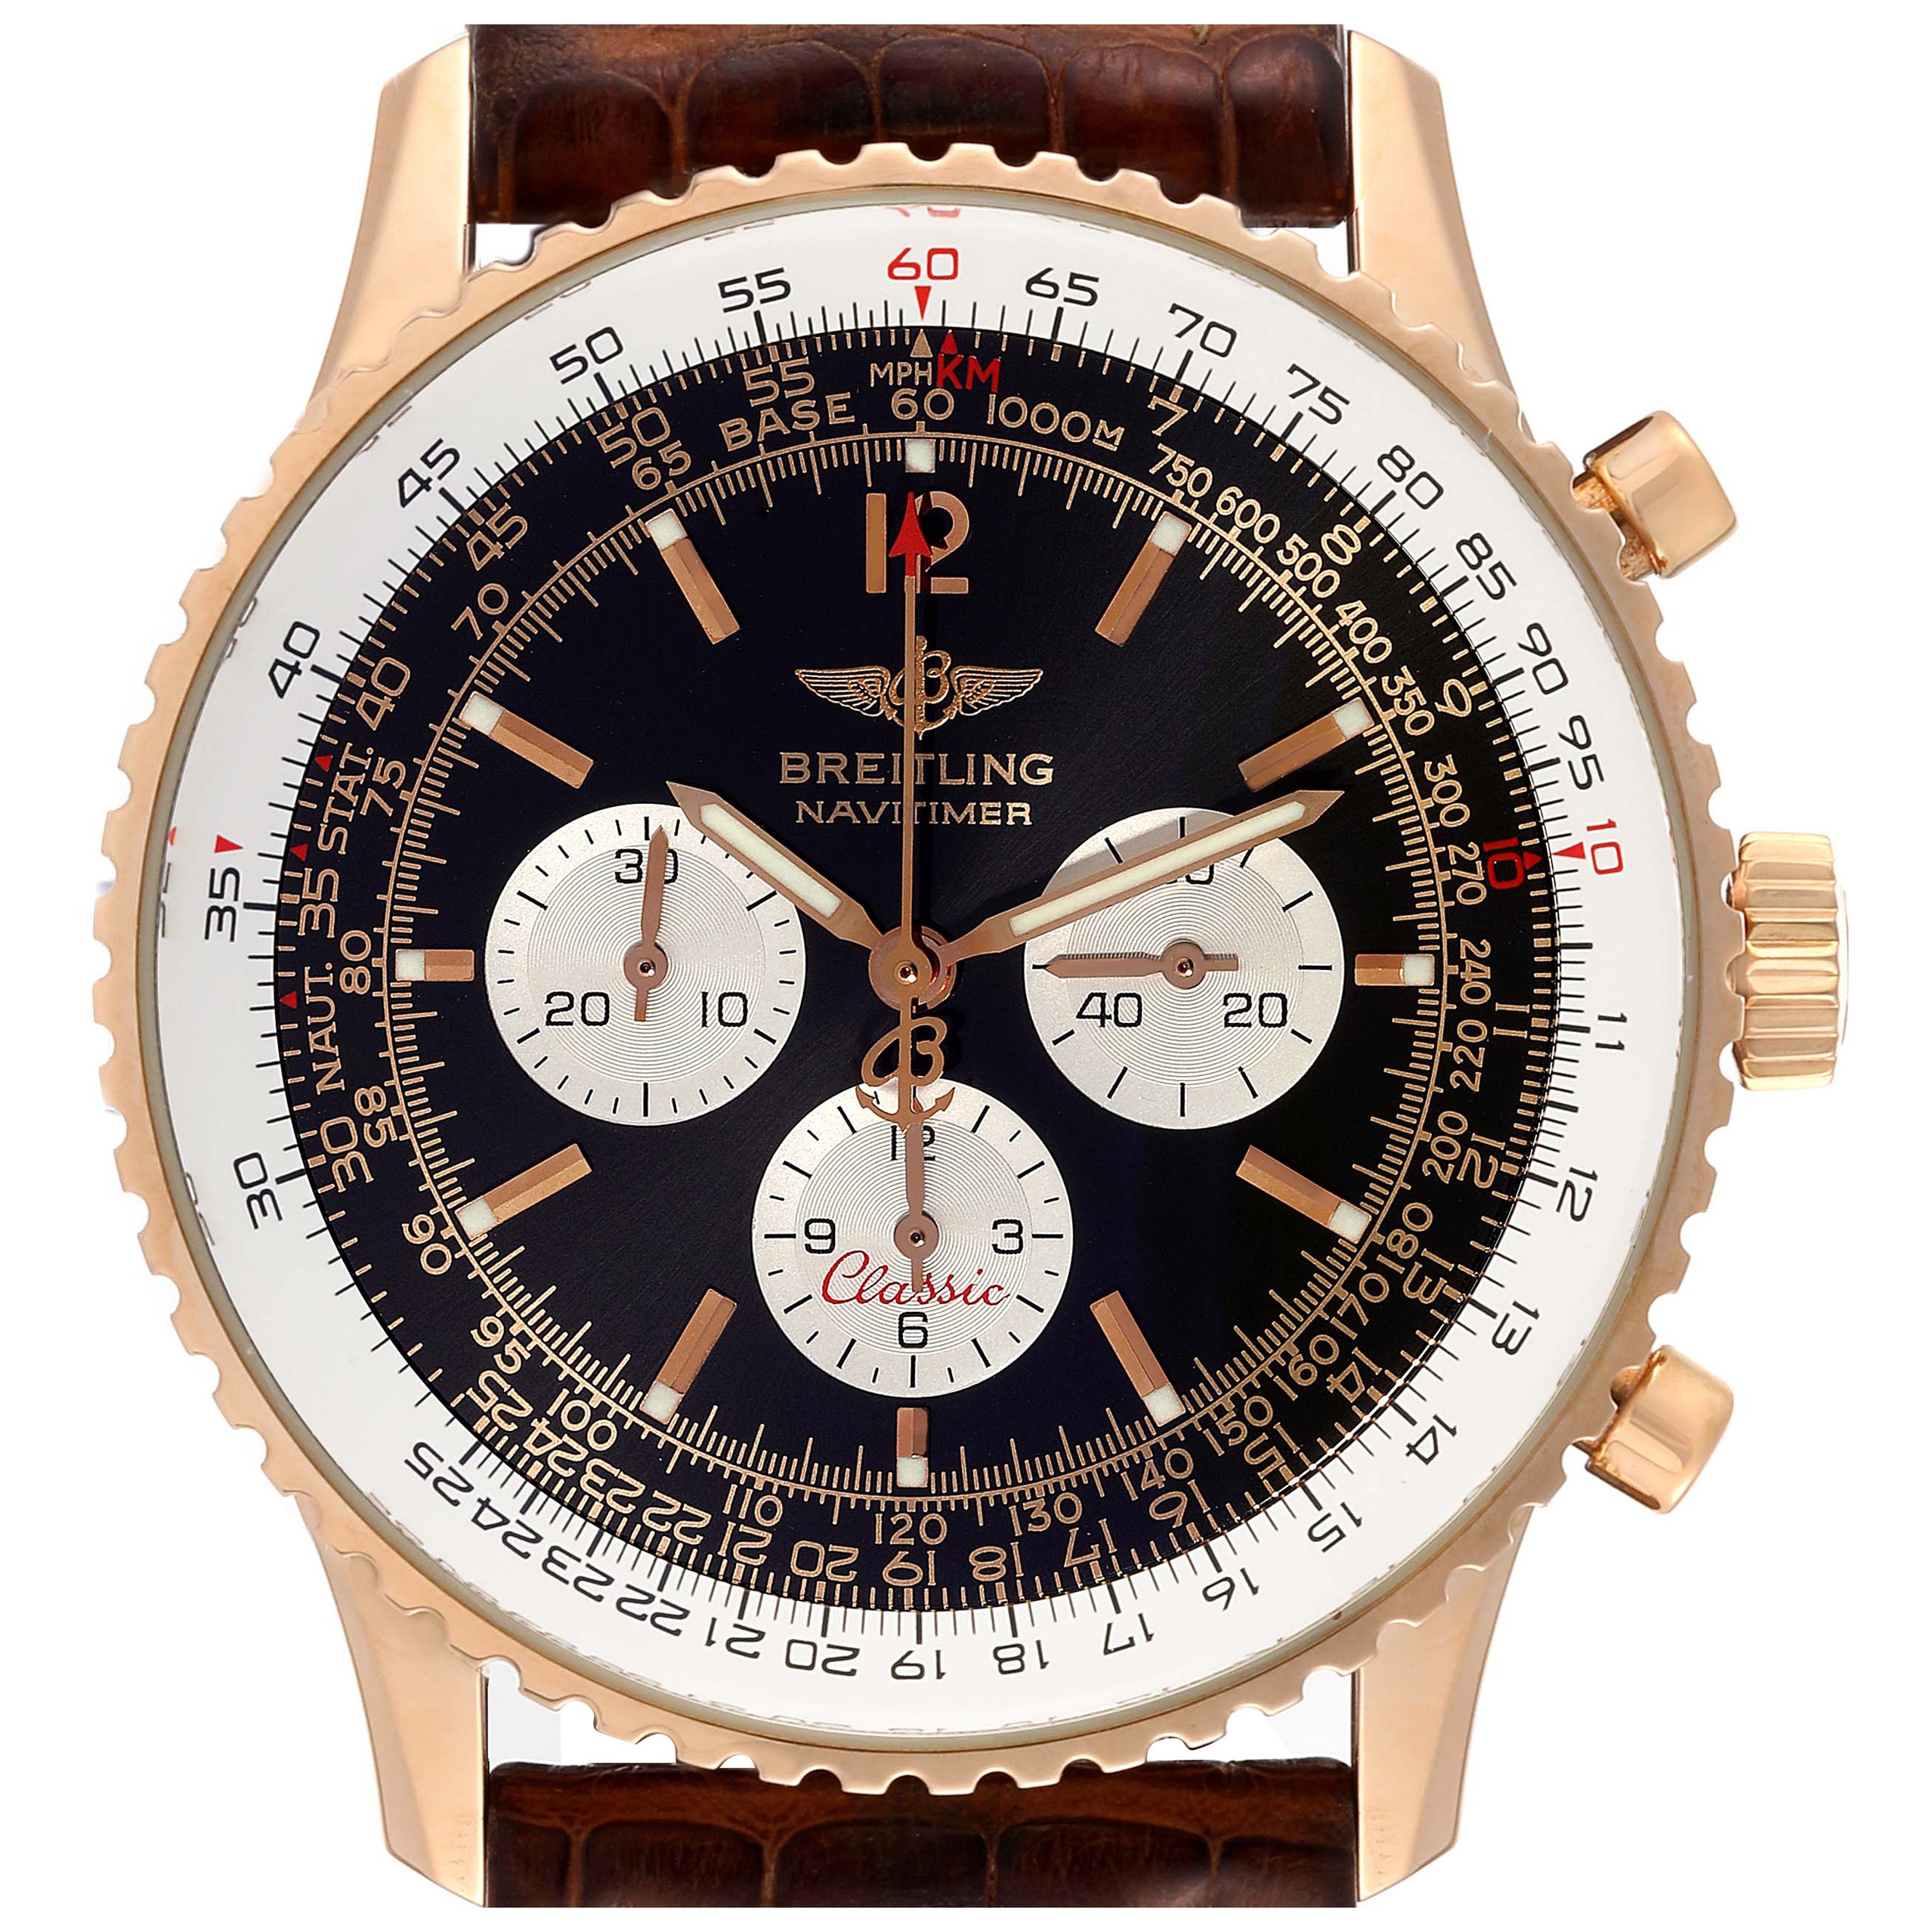 Breitling Navitimer Classic LE Rose Gold Mens Watch H30330 Box Papers